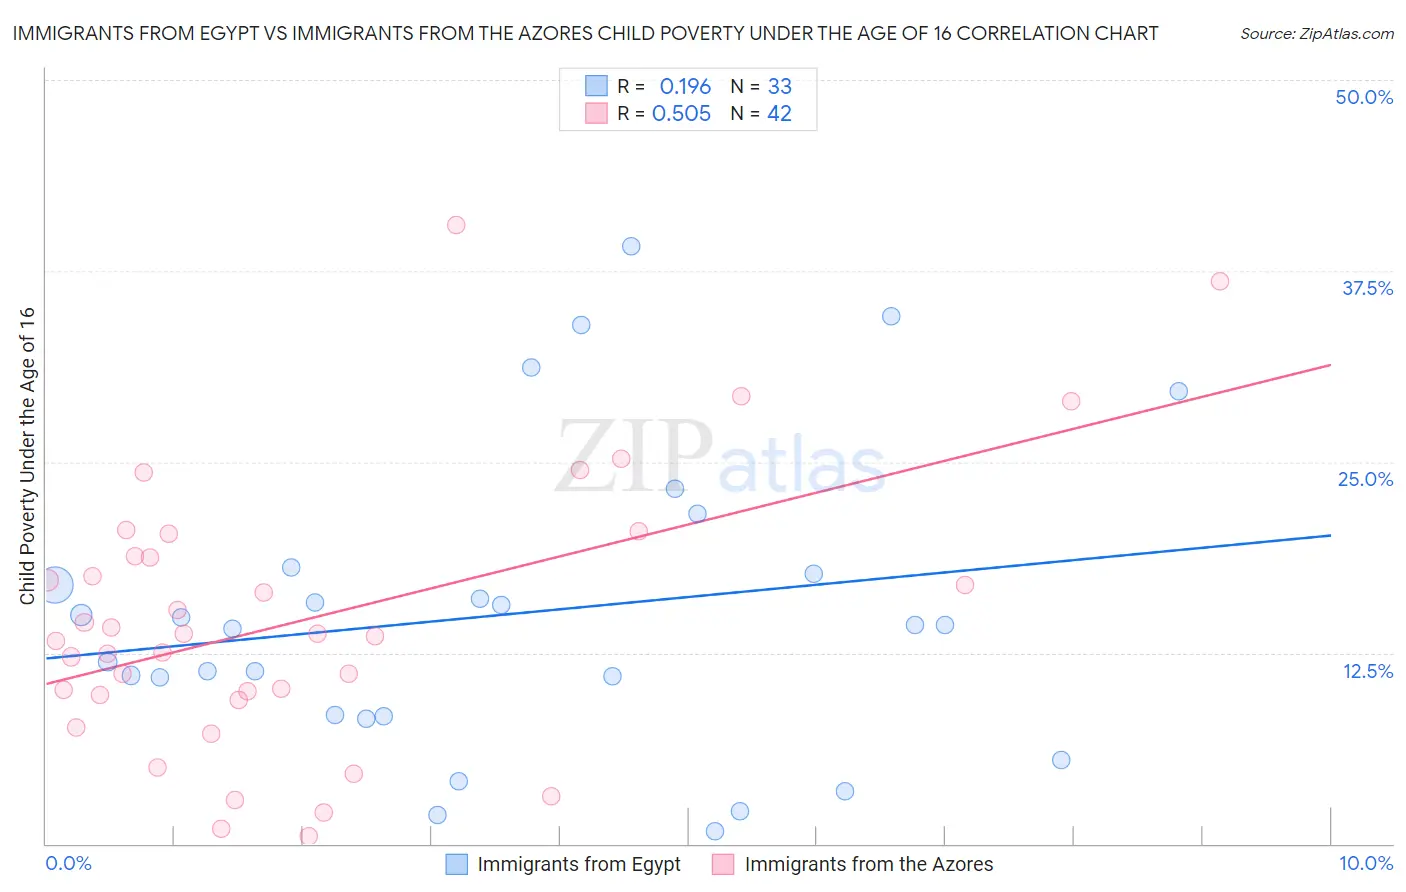 Immigrants from Egypt vs Immigrants from the Azores Child Poverty Under the Age of 16